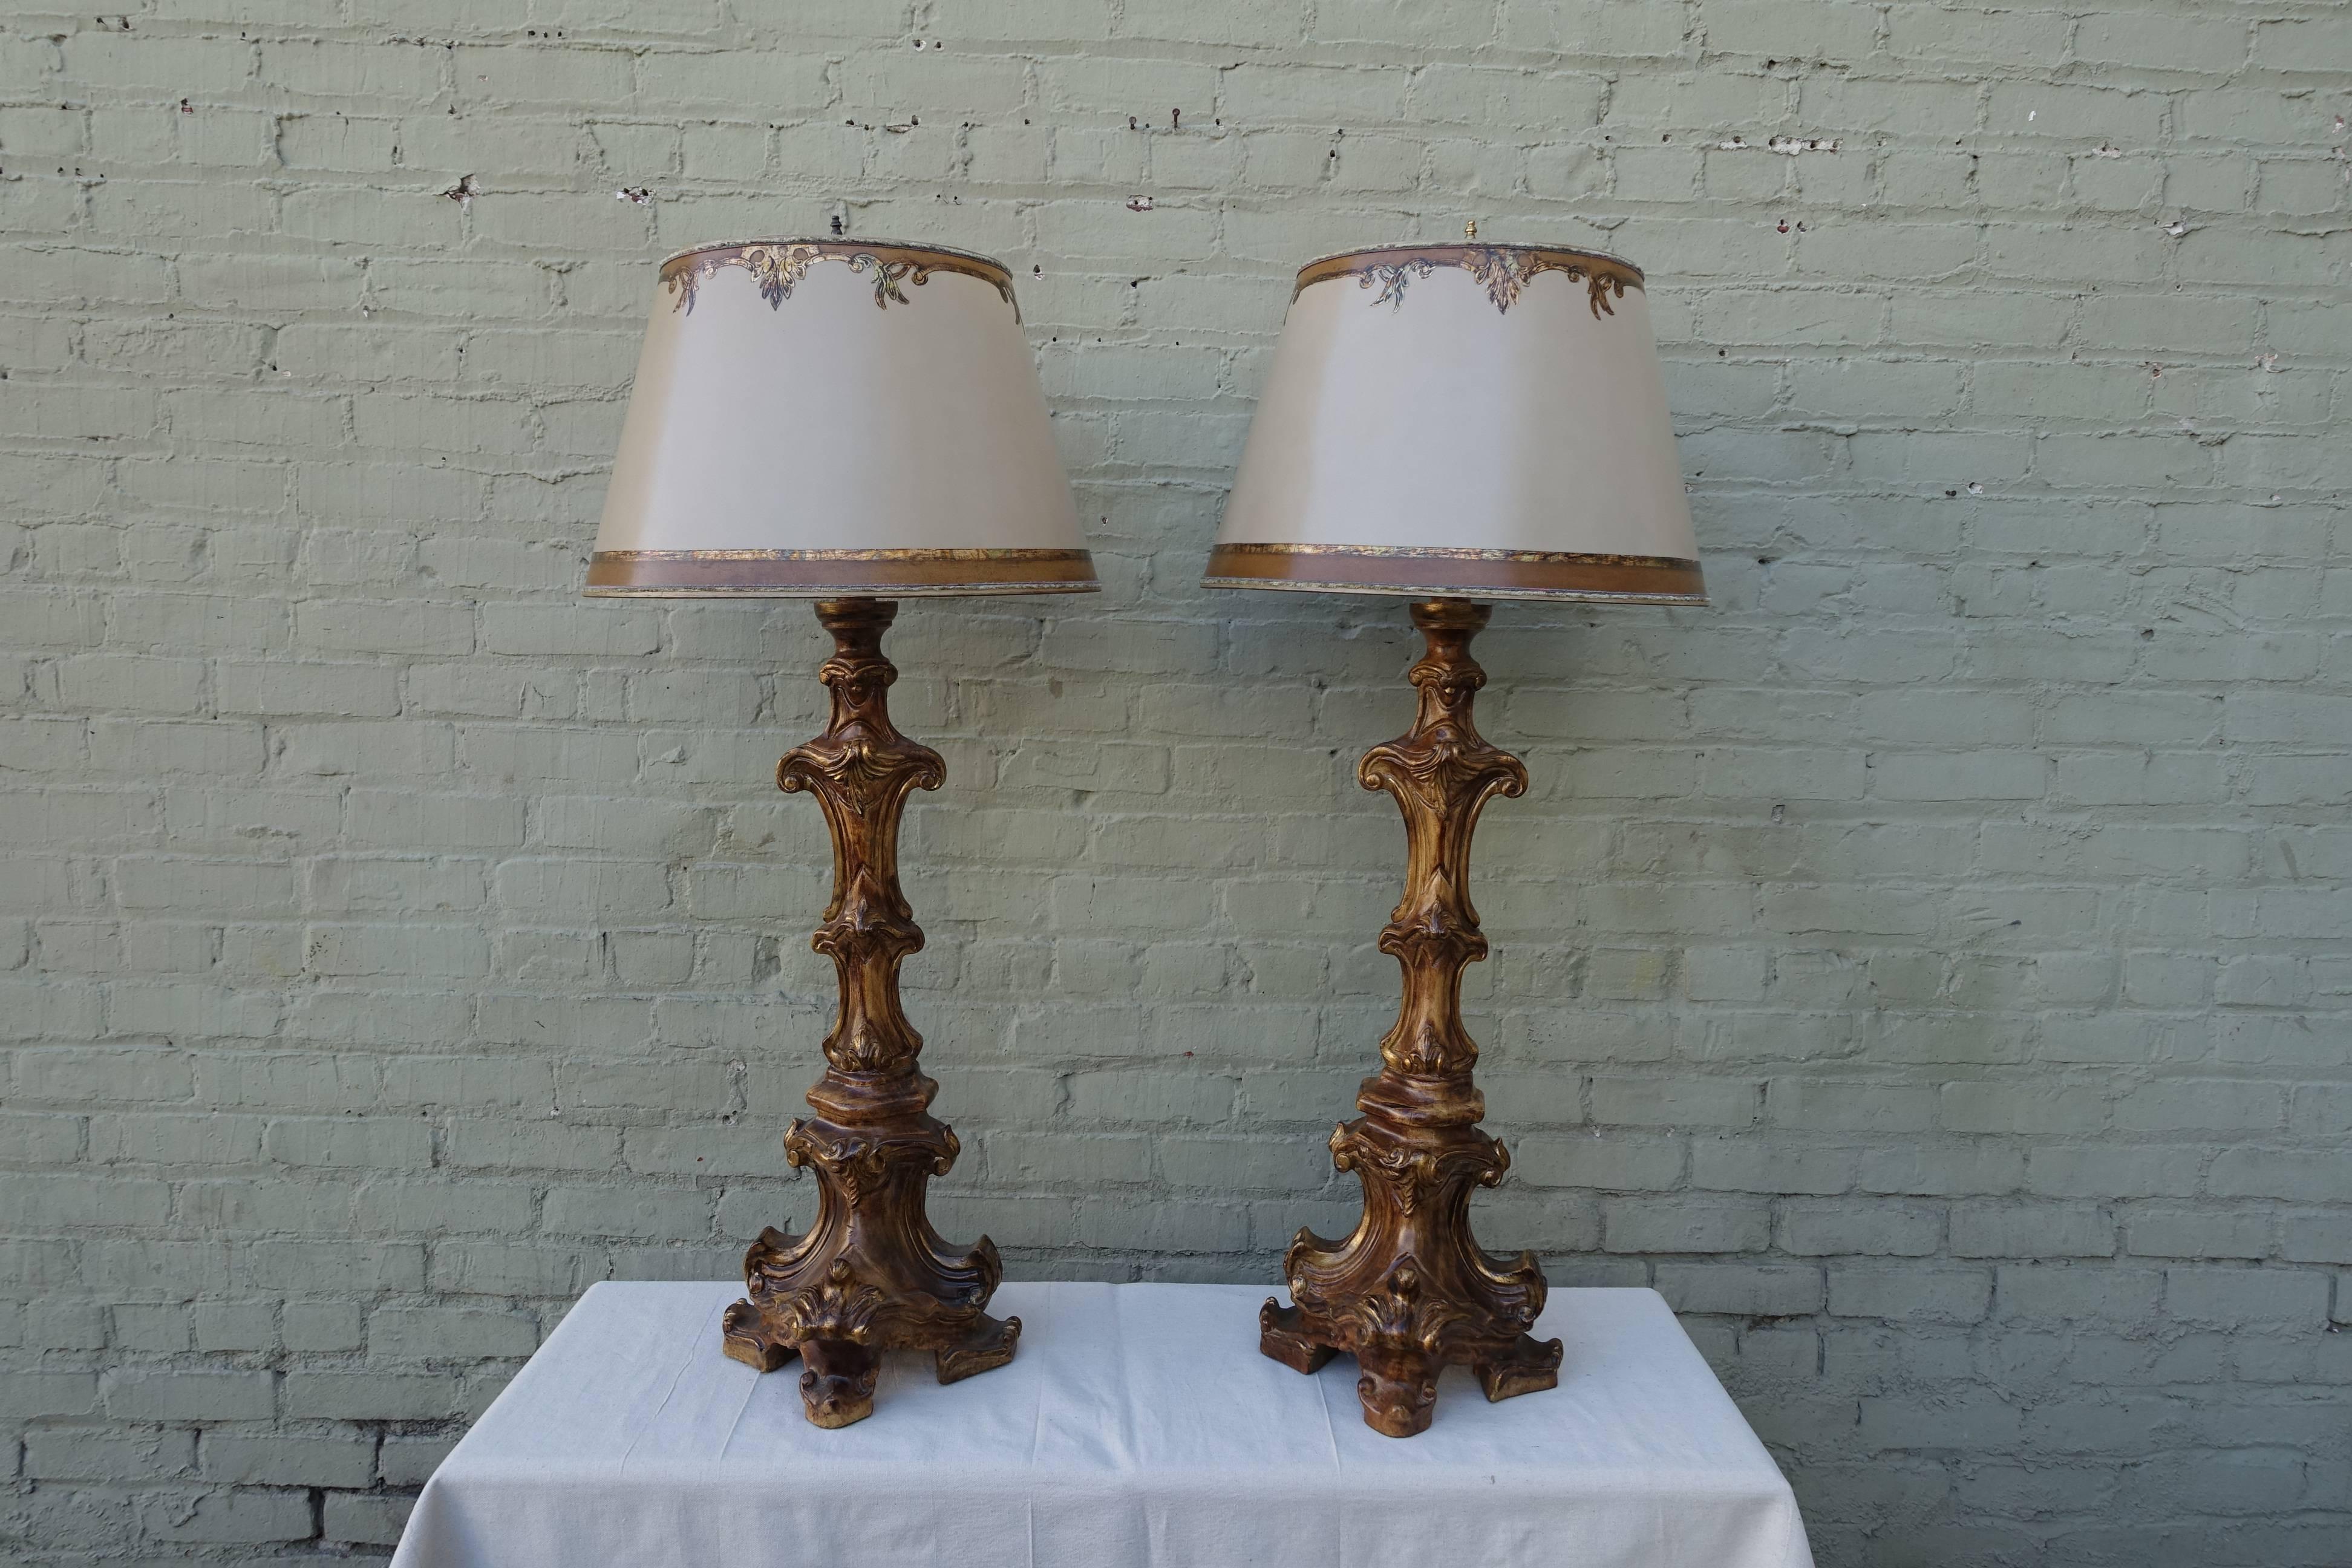 Wood Carved Italian Candlestick Lamps with Parchment Shades